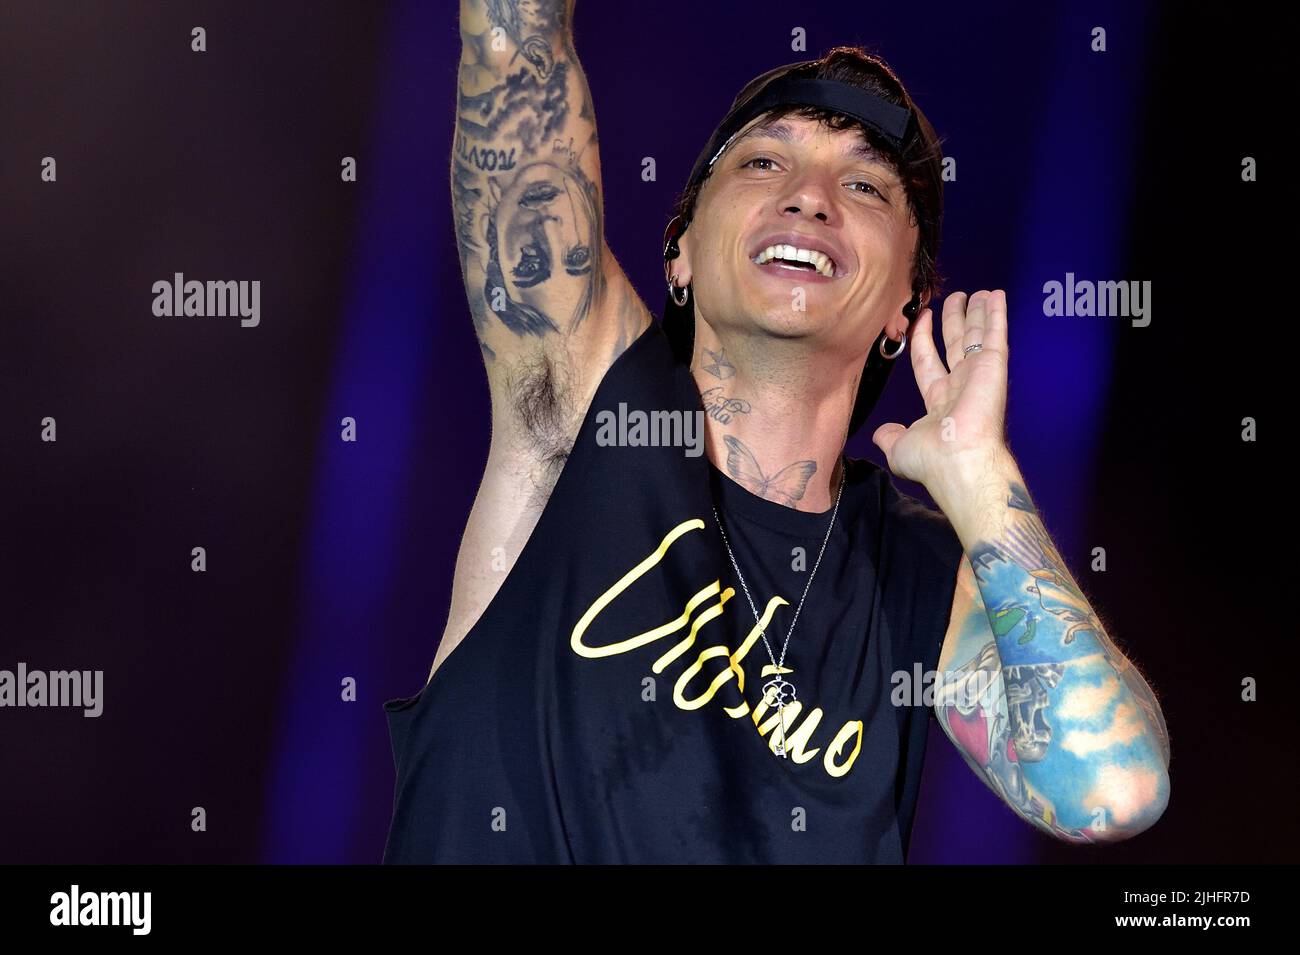 Rome, Italy. 17th July, 2022. The Italian singer Ultimo, pseudonym of Niccolò Moriconi, performs at the Circus Maximus in Rome on July 17, 2022 in Rome, Italy. Credit: dpa/Alamy Live News Stock Photo